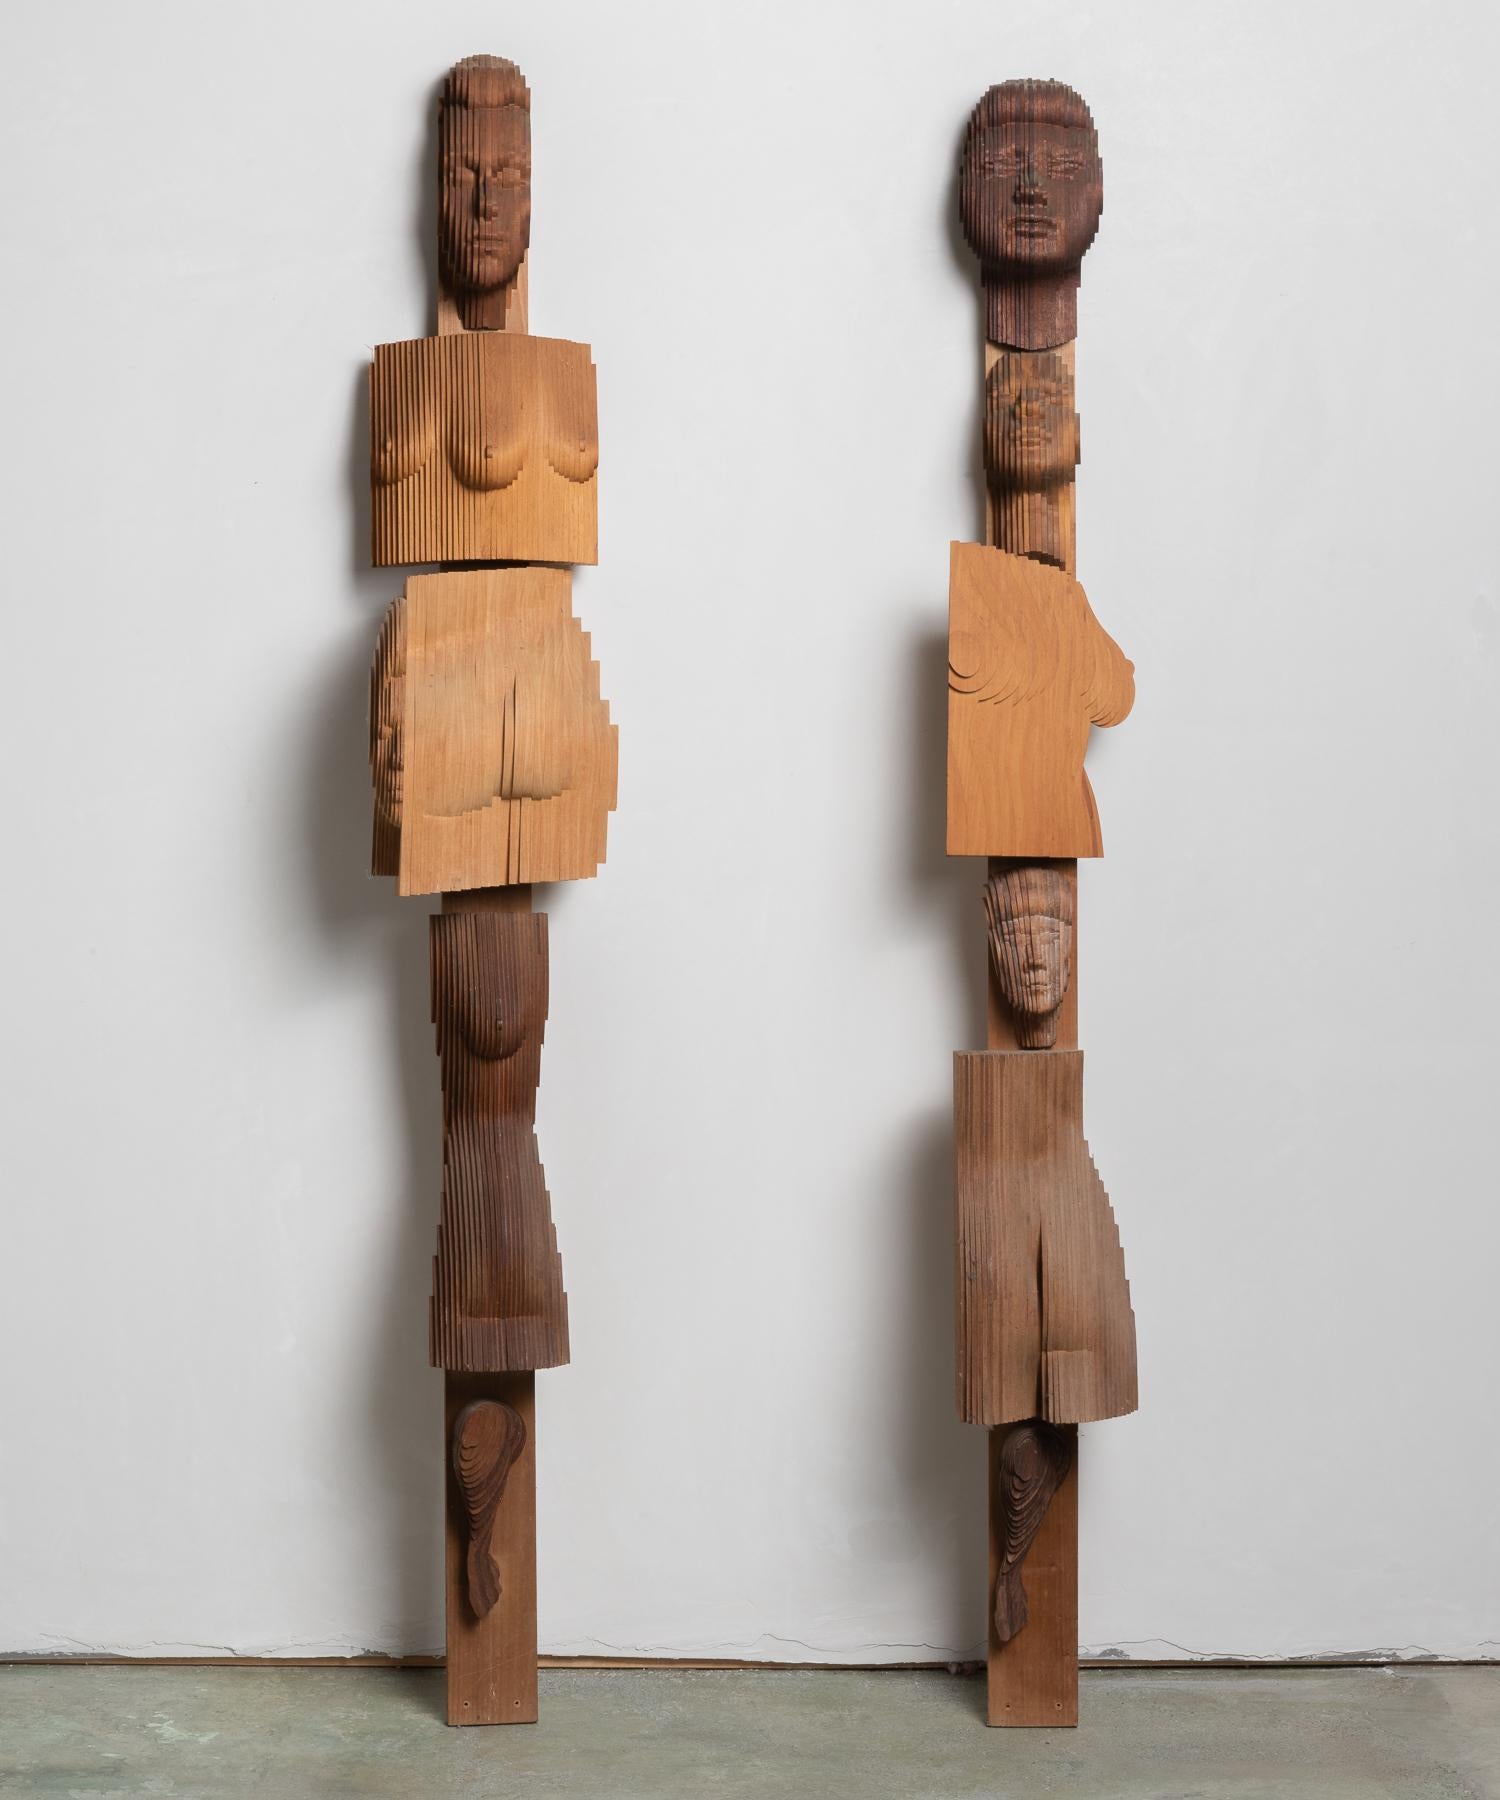 TOTEM Sculptures by Reuben Karol, America, 20th century.

A pair of totemic forms composed of hybrid female figures constructed of thinly slatted wood.

Measures: 10.5